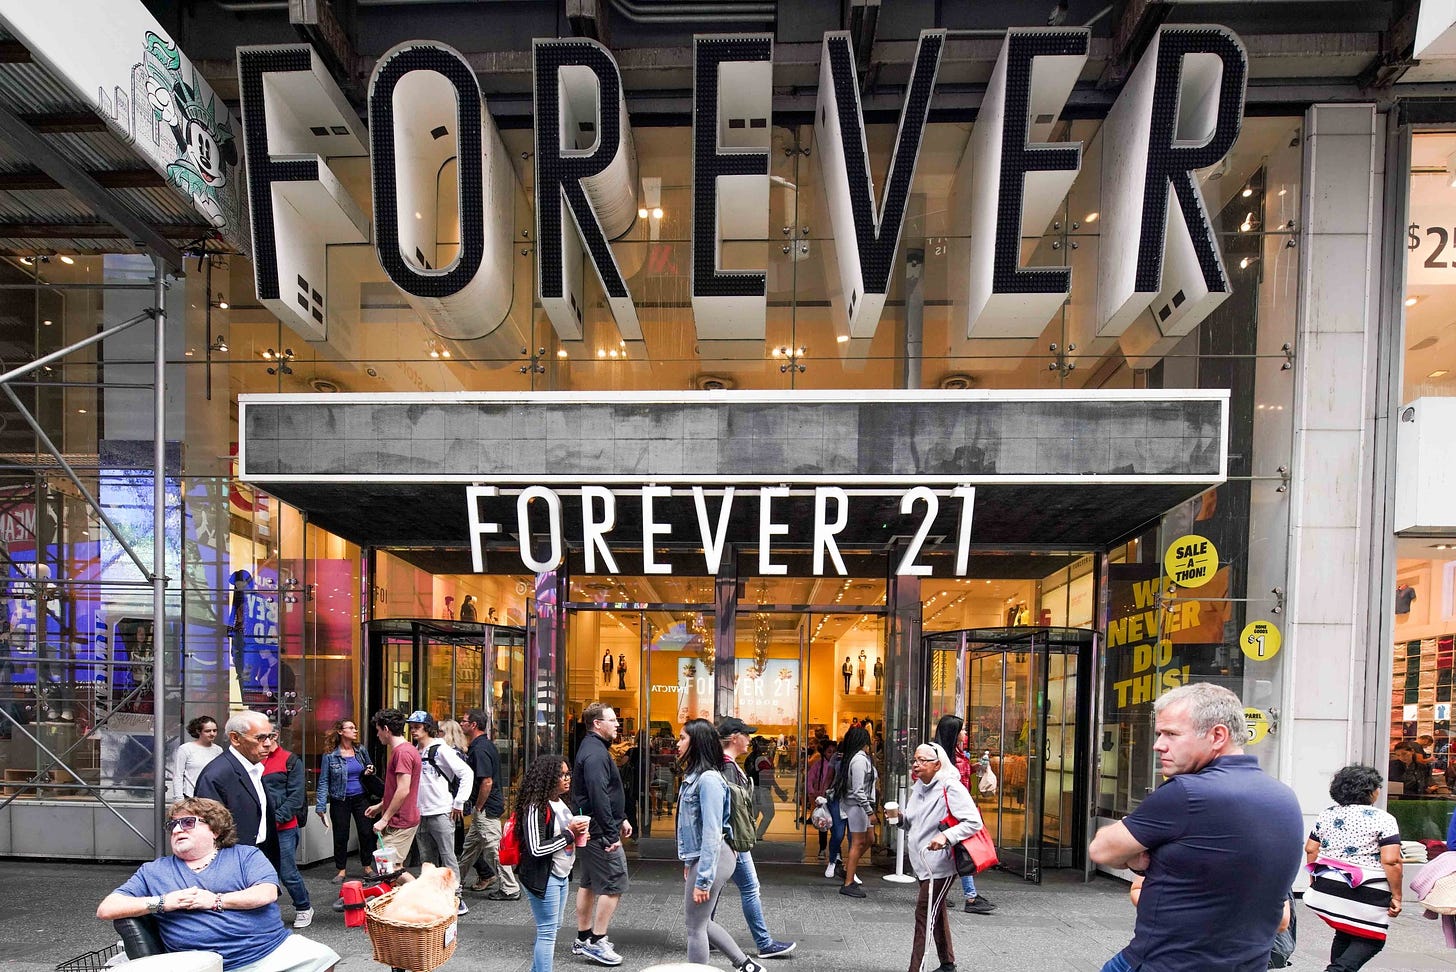 Authentic Considering Forever 21 Deal With Landlord: Source